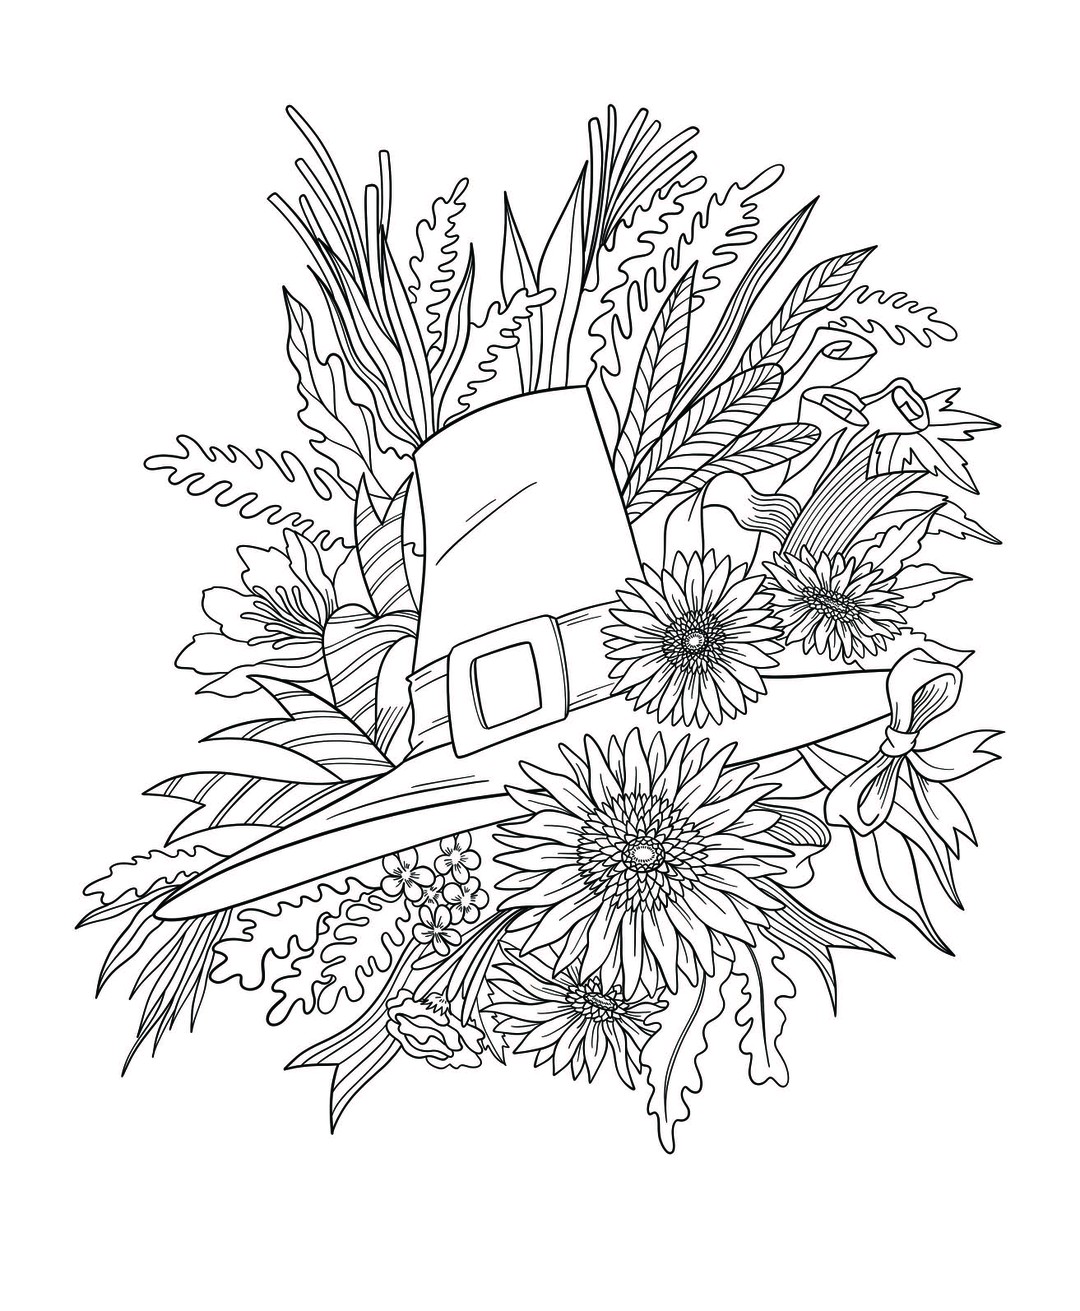 Freebie Friday 09-20-19 Colorful Seasons Coloring Page